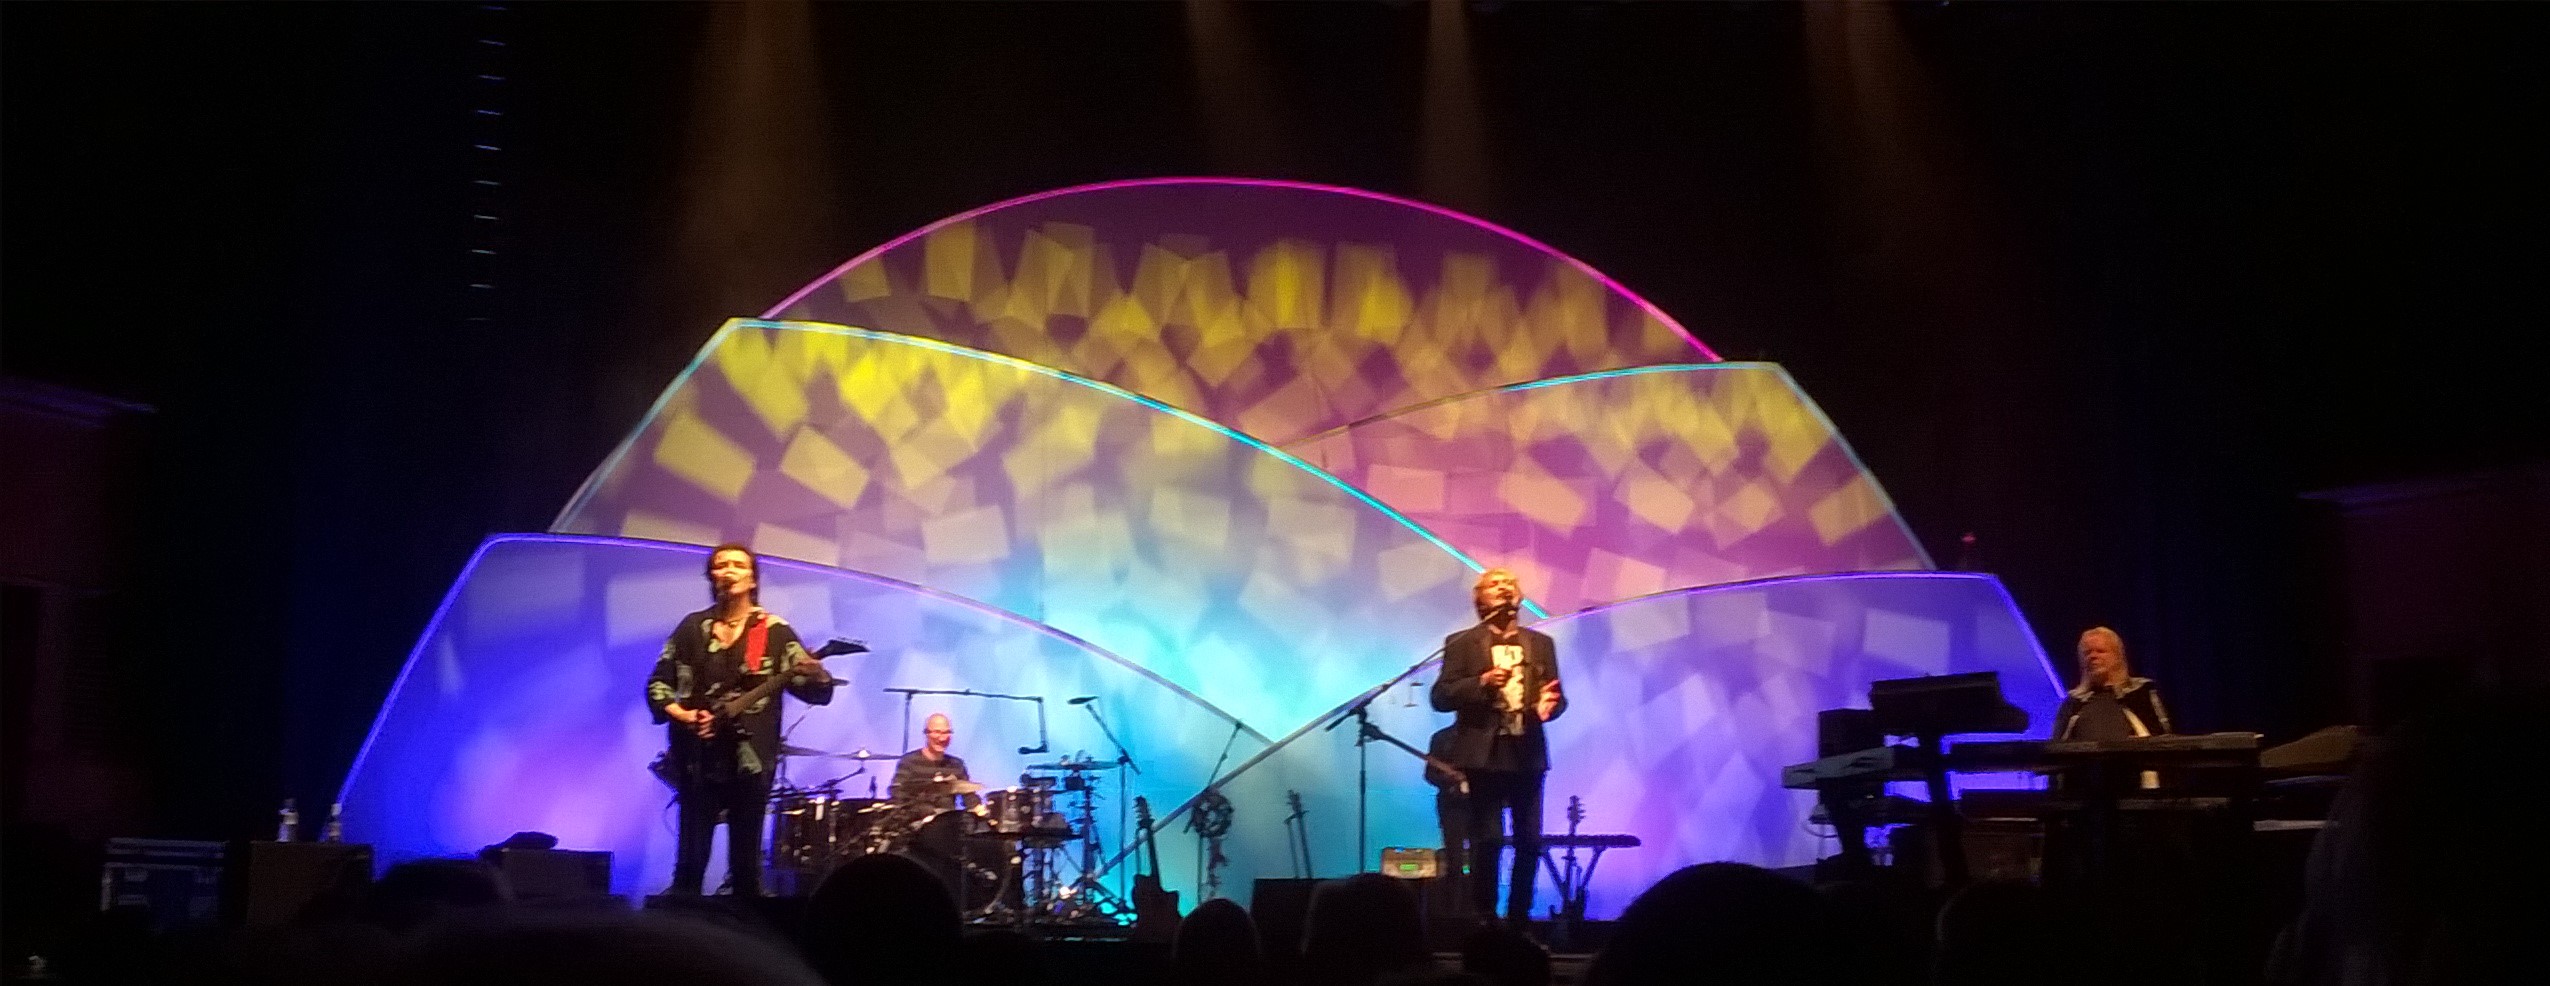 ANDERSON RABIN AND WAKEMAN – Royal Concert Hall, Glasgow, 24 March 2017